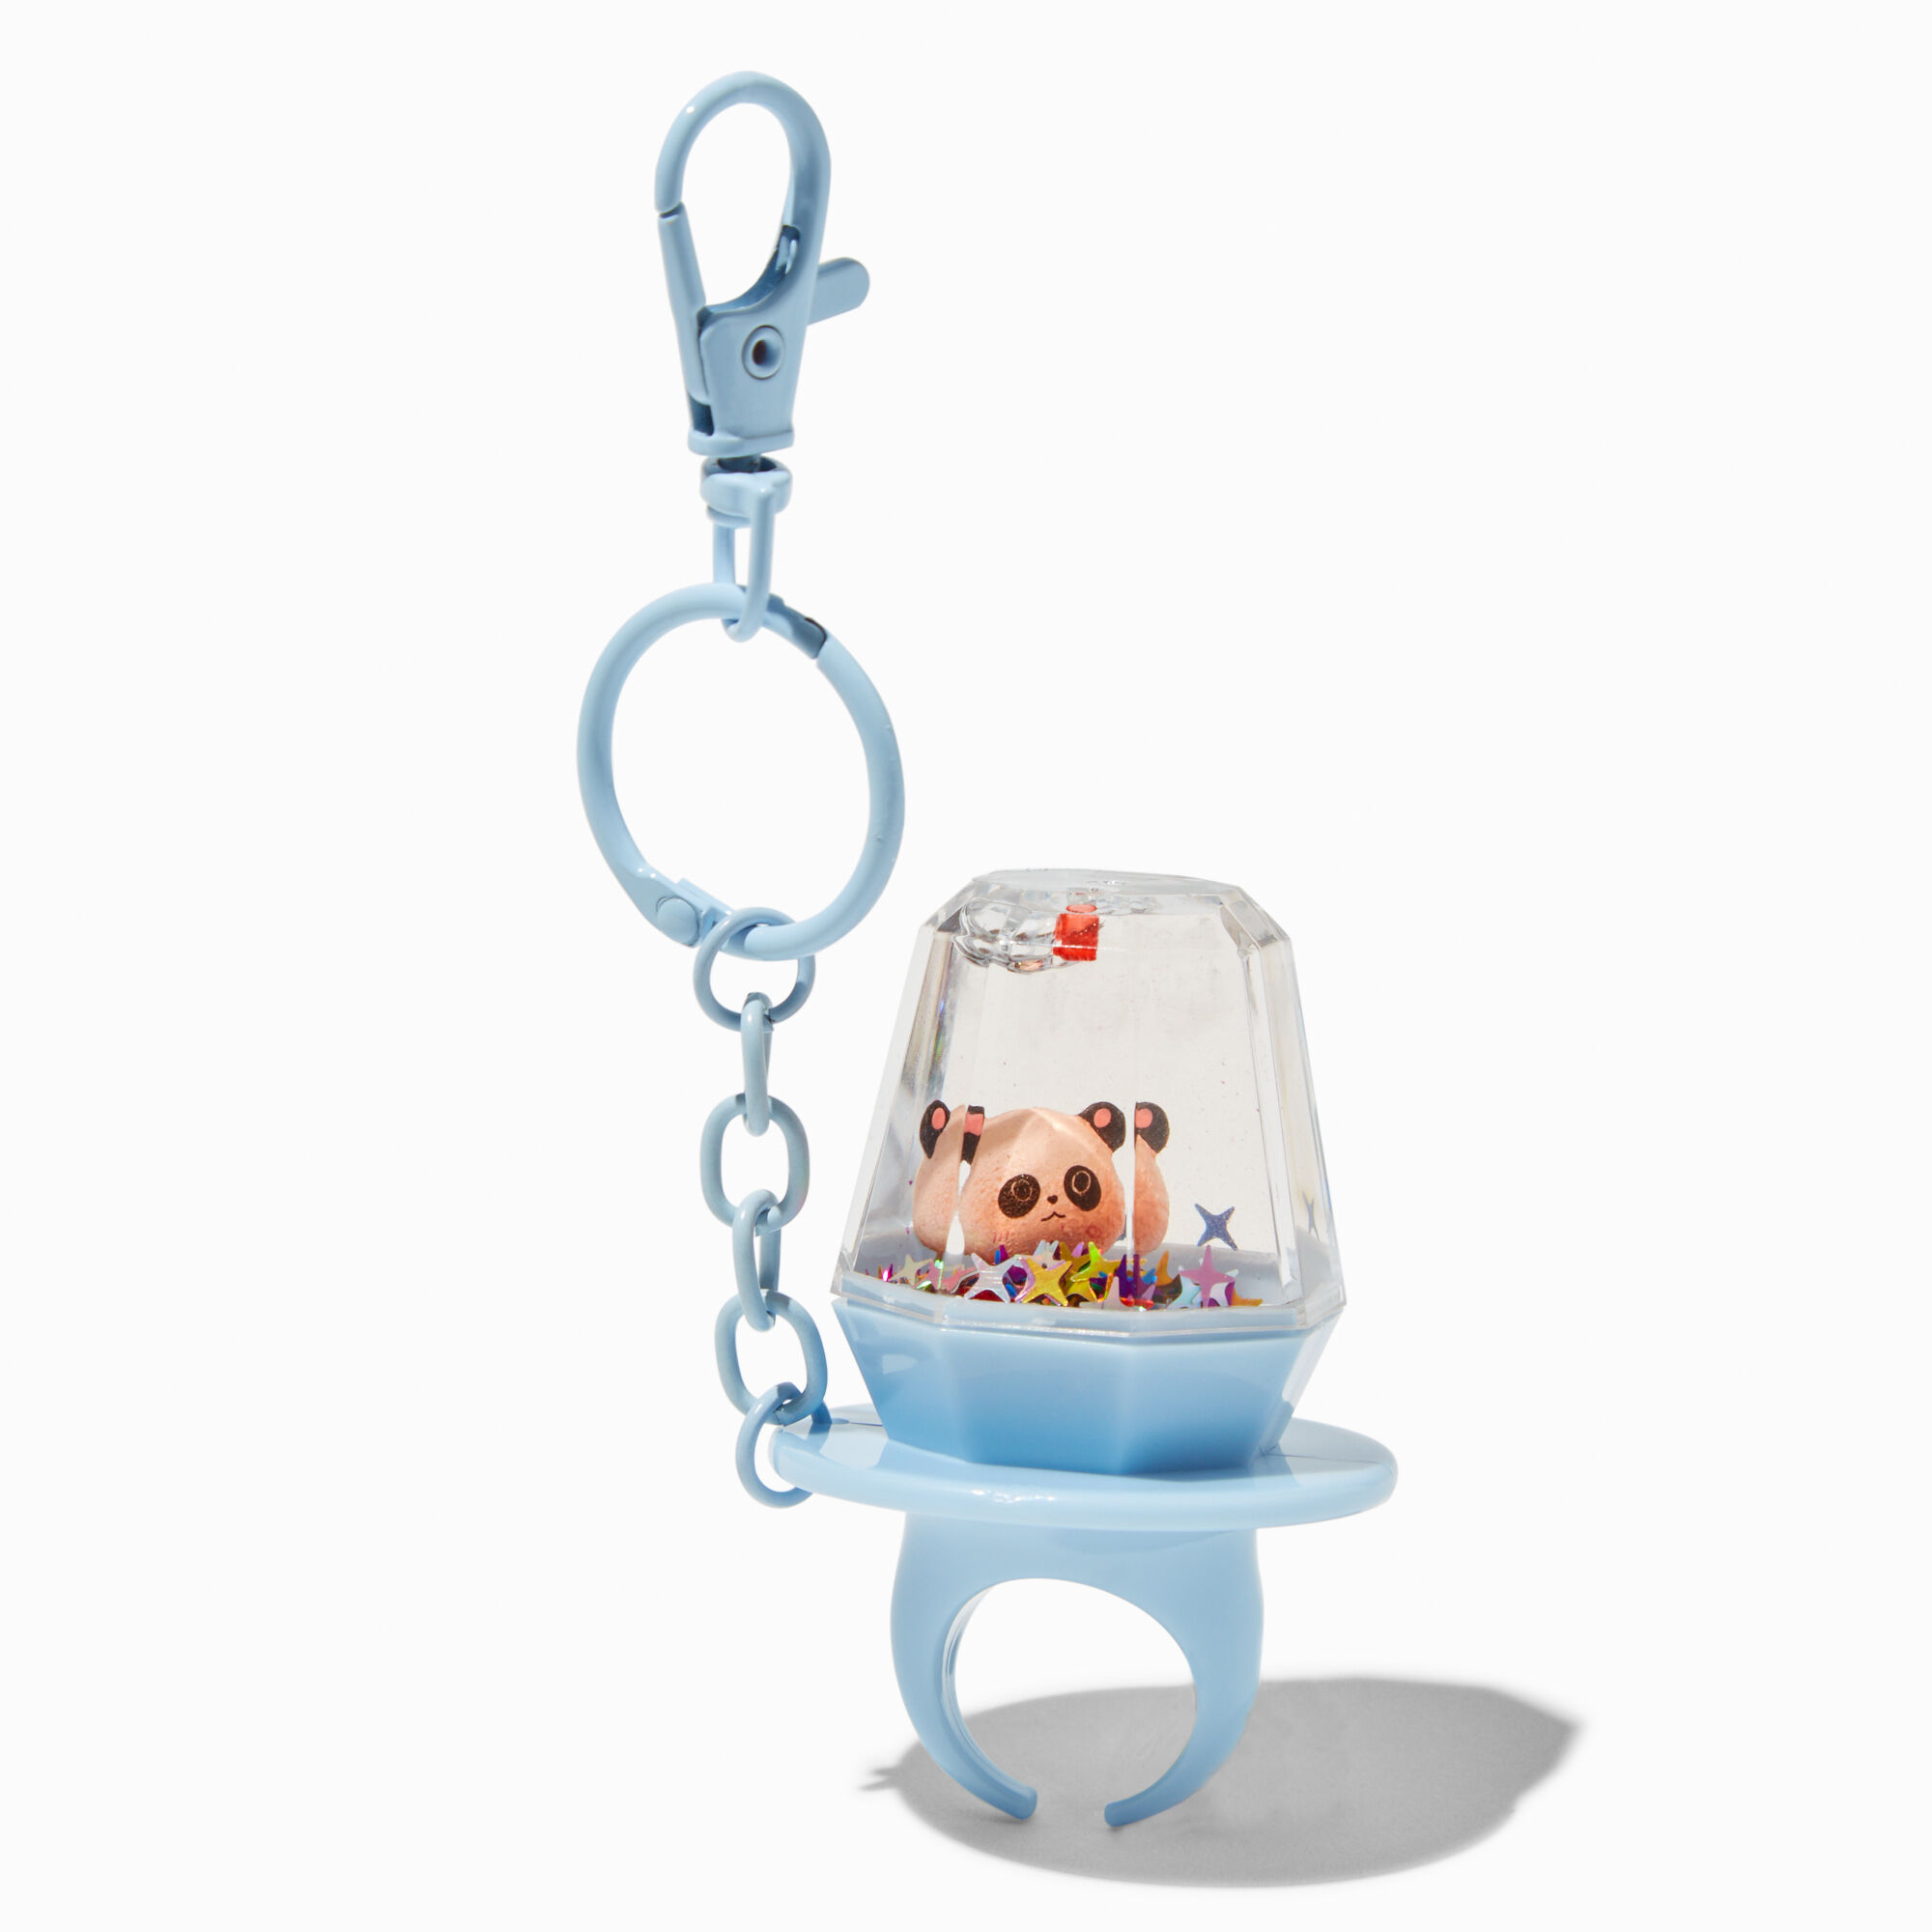 View Claires Panda Ring WaterFilled Glittery Keyring information